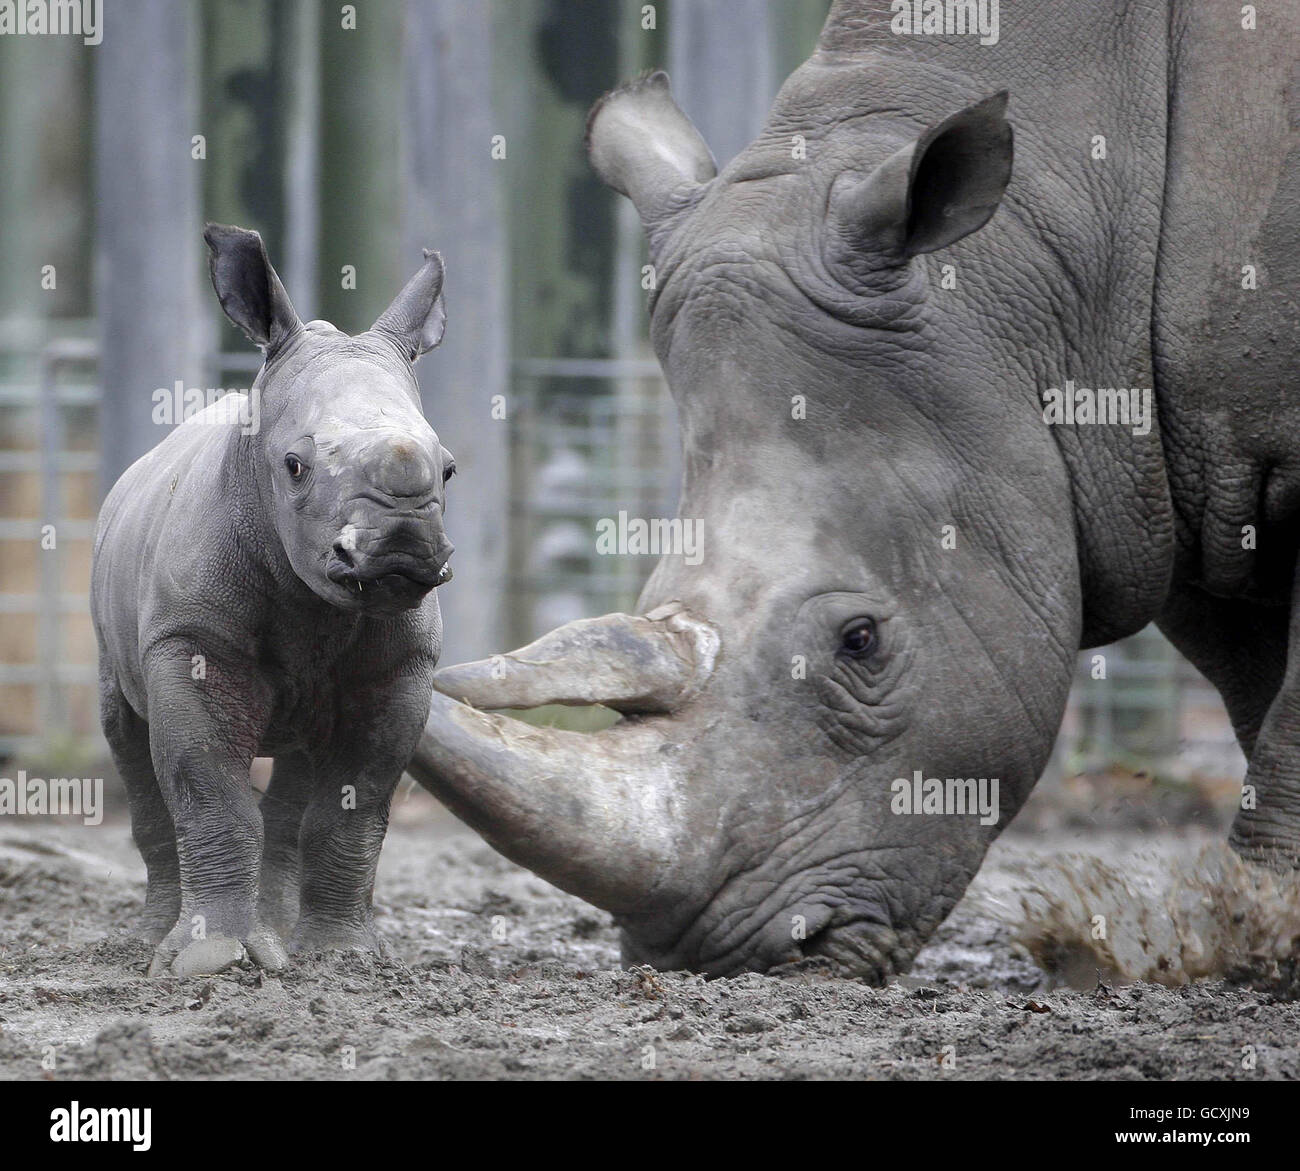 Dublin Zoo introduces its new rhino calf as he takes his first steps with his mother Ashanti. Stock Photo